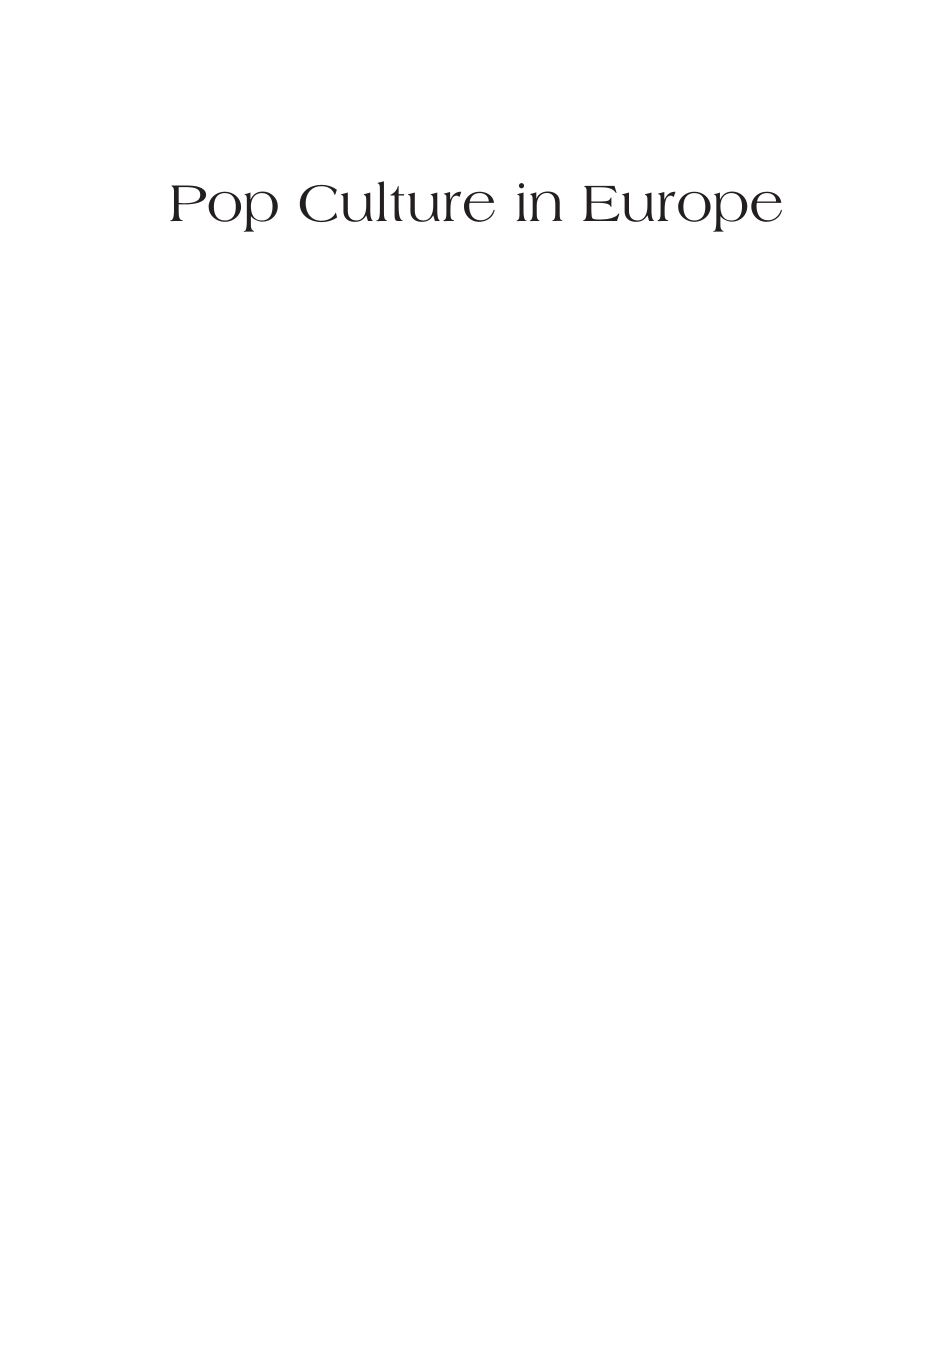 Pop Culture in Europe page i